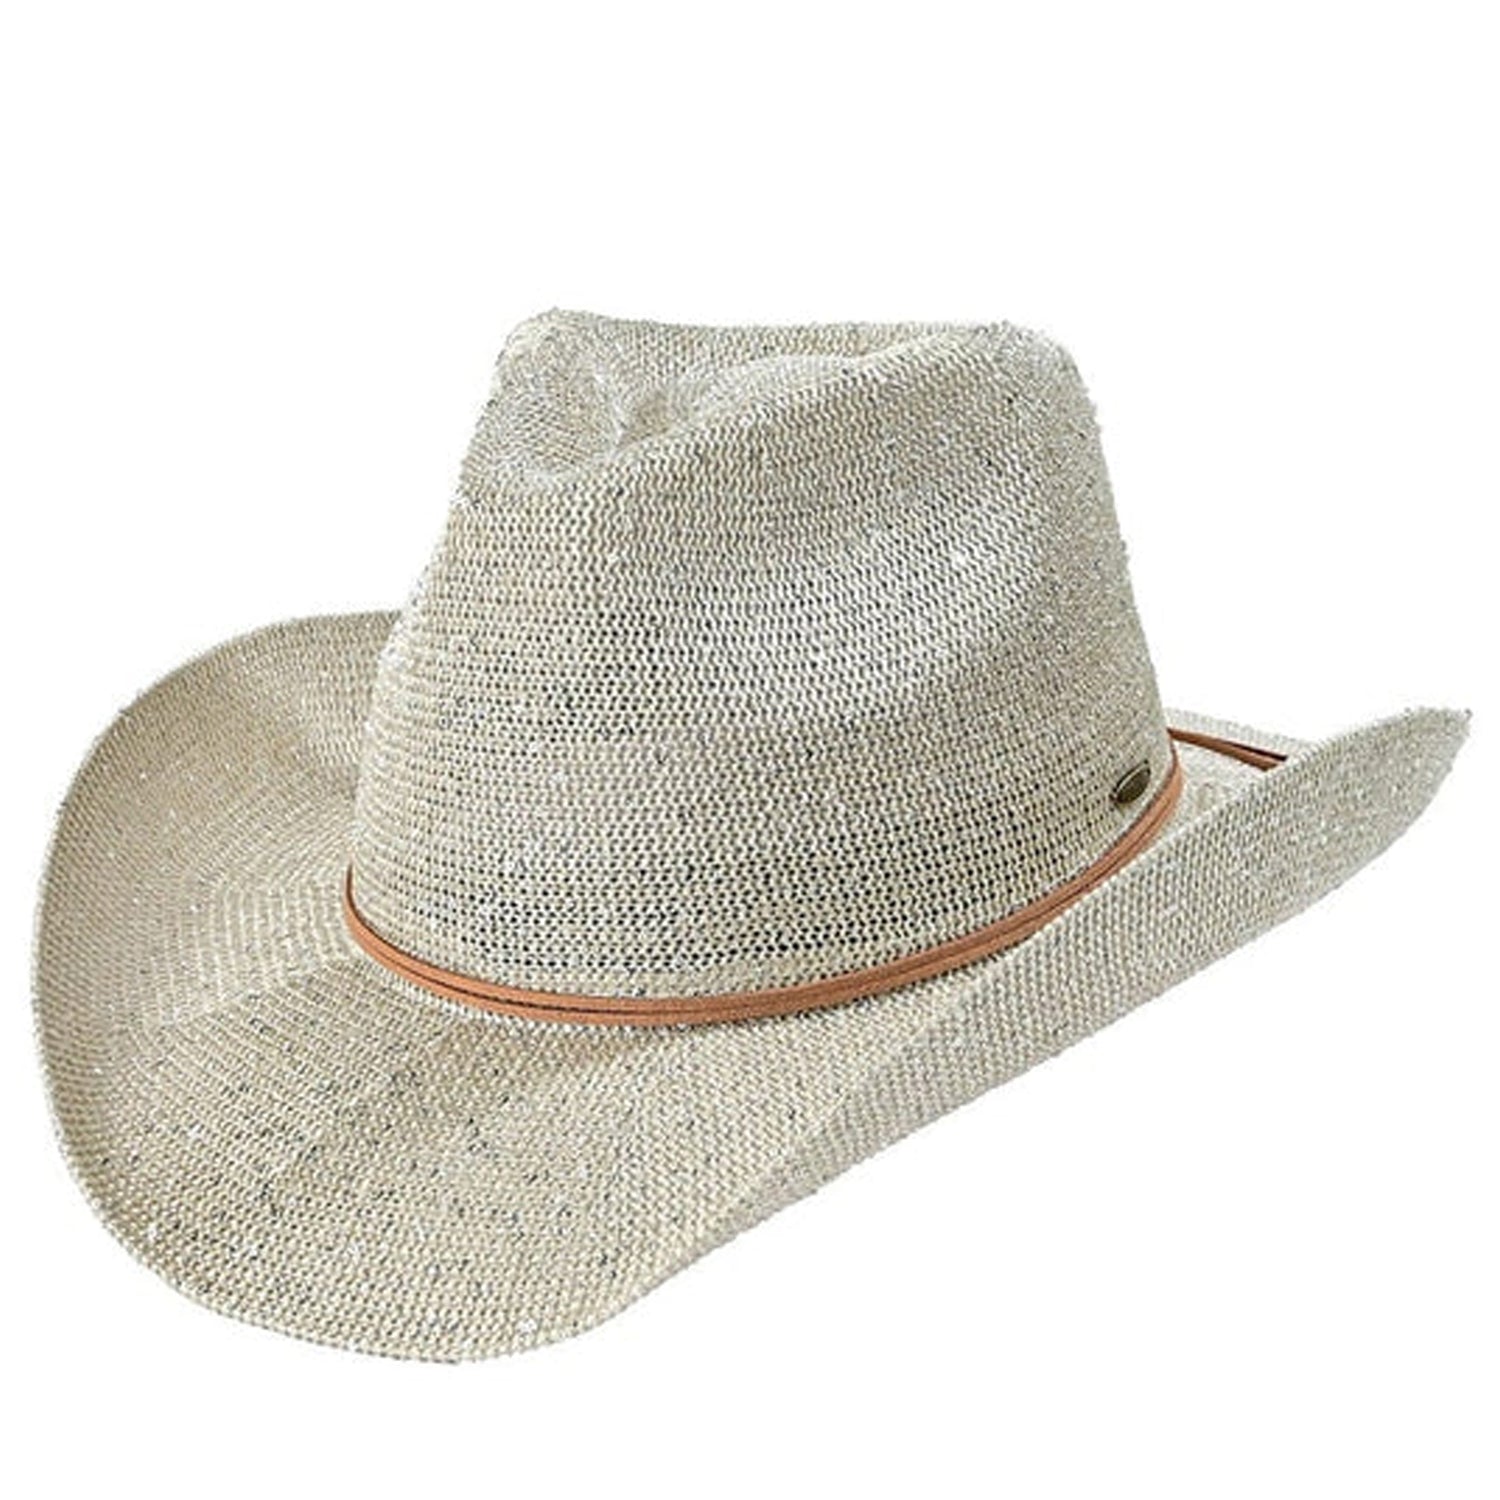 CBC-03 Cowgirl Hat with Glitter Pearl